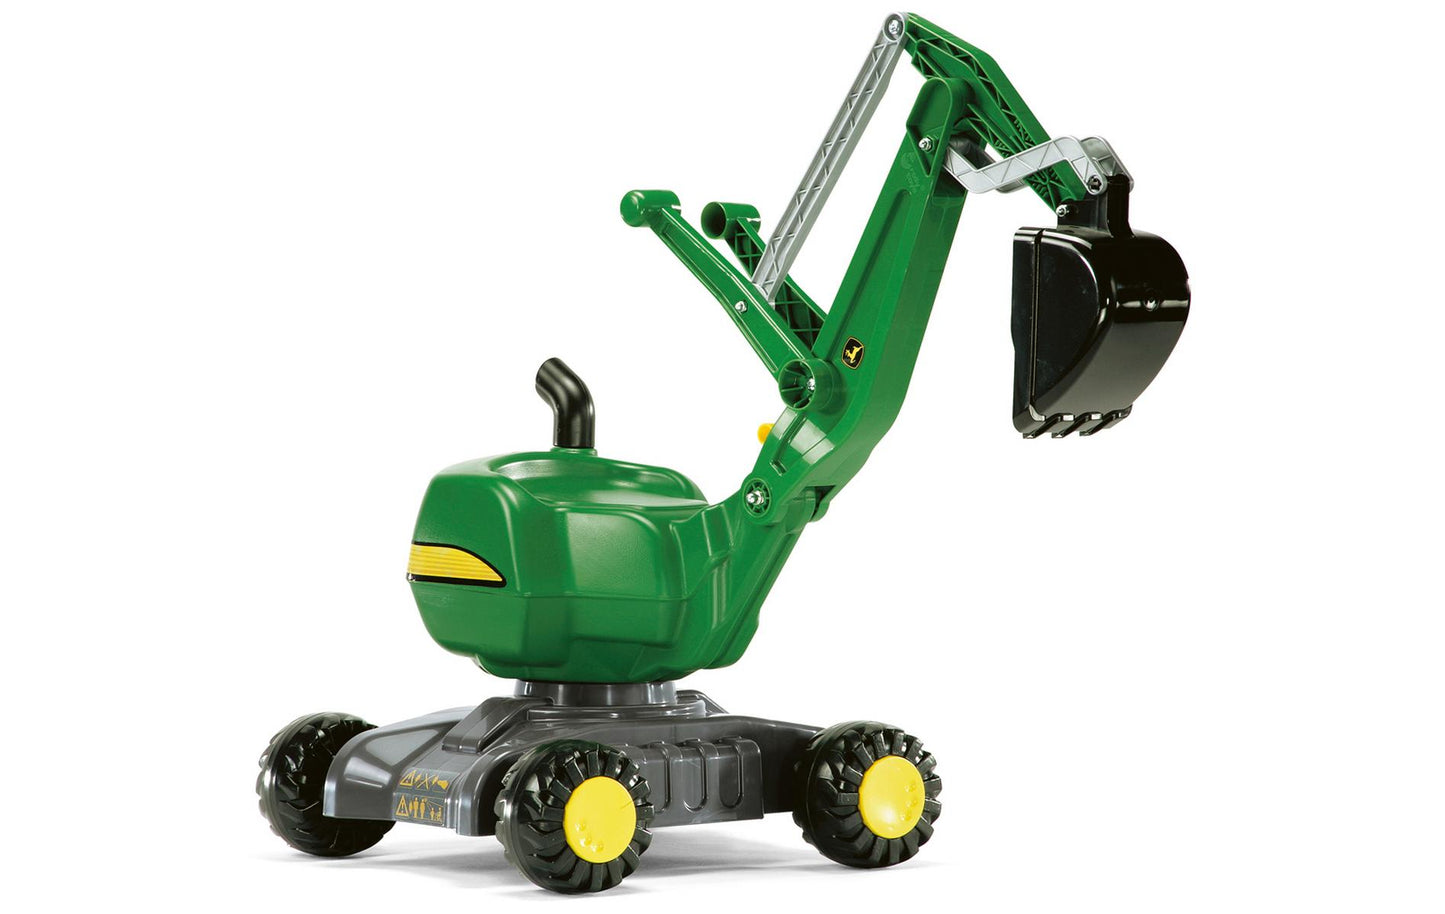 Rolly Toys John Deere Excavator - Fully Functional With Wheels